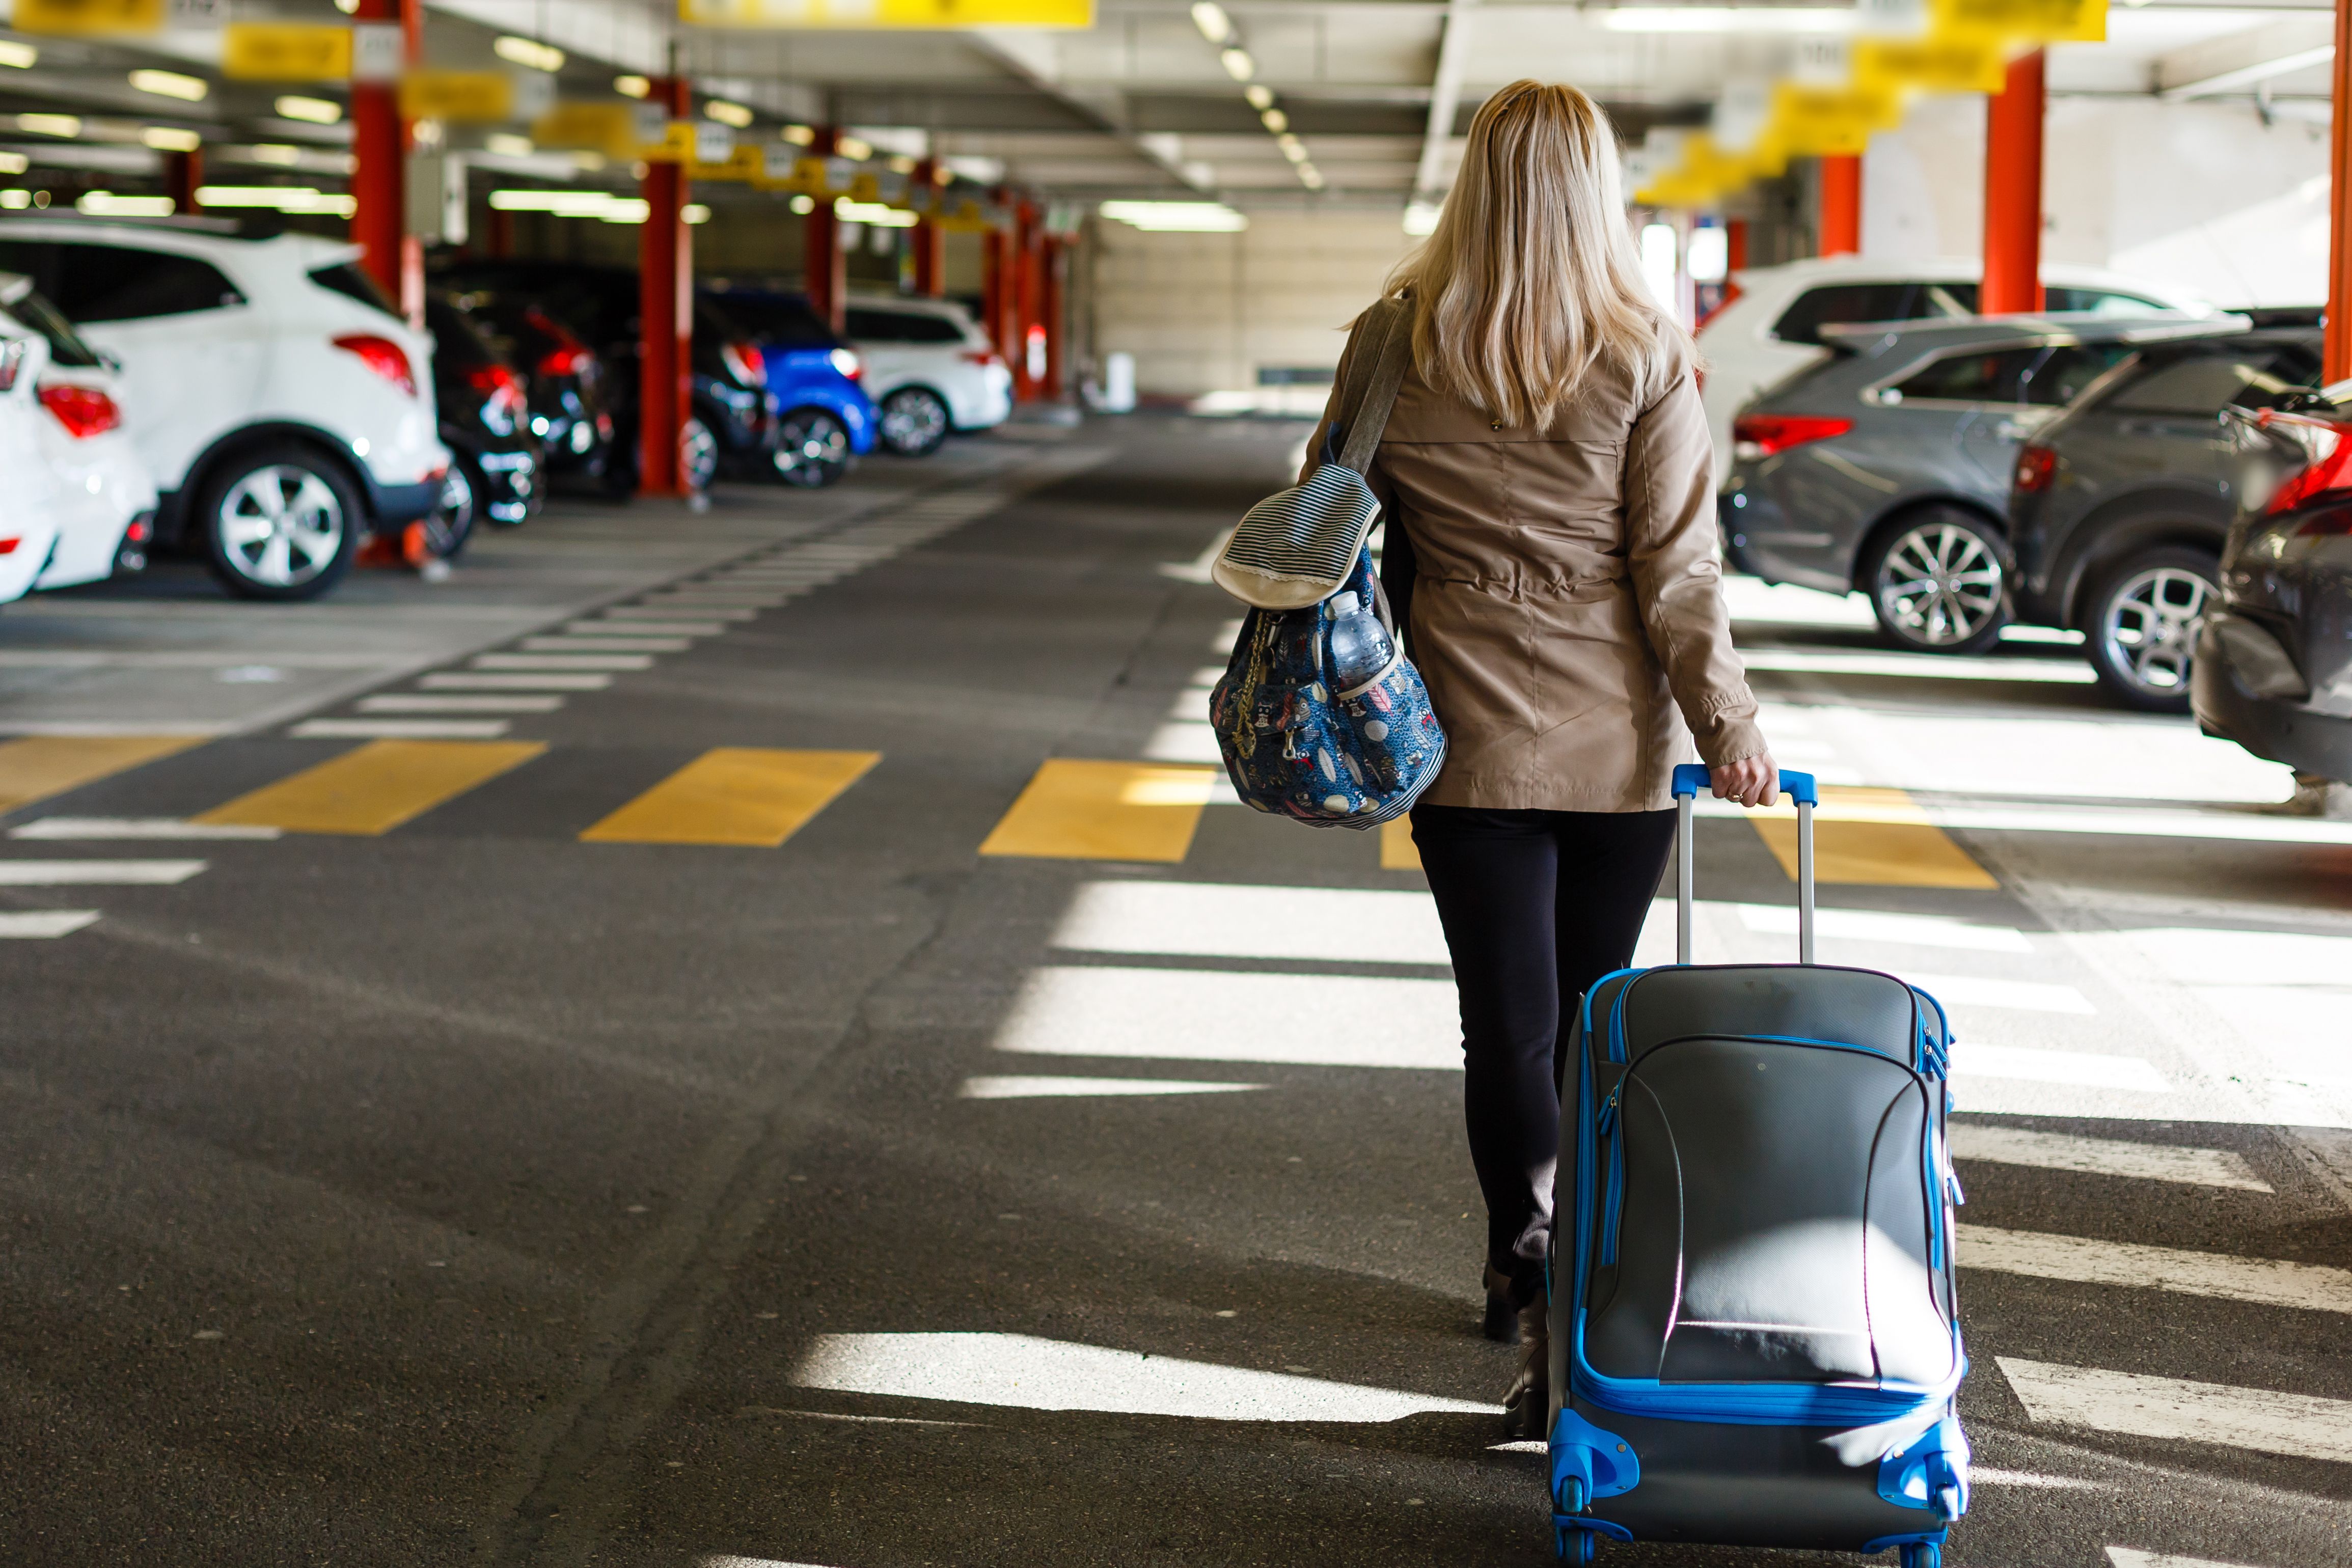 A passenger carrying luggage through an airport car park.